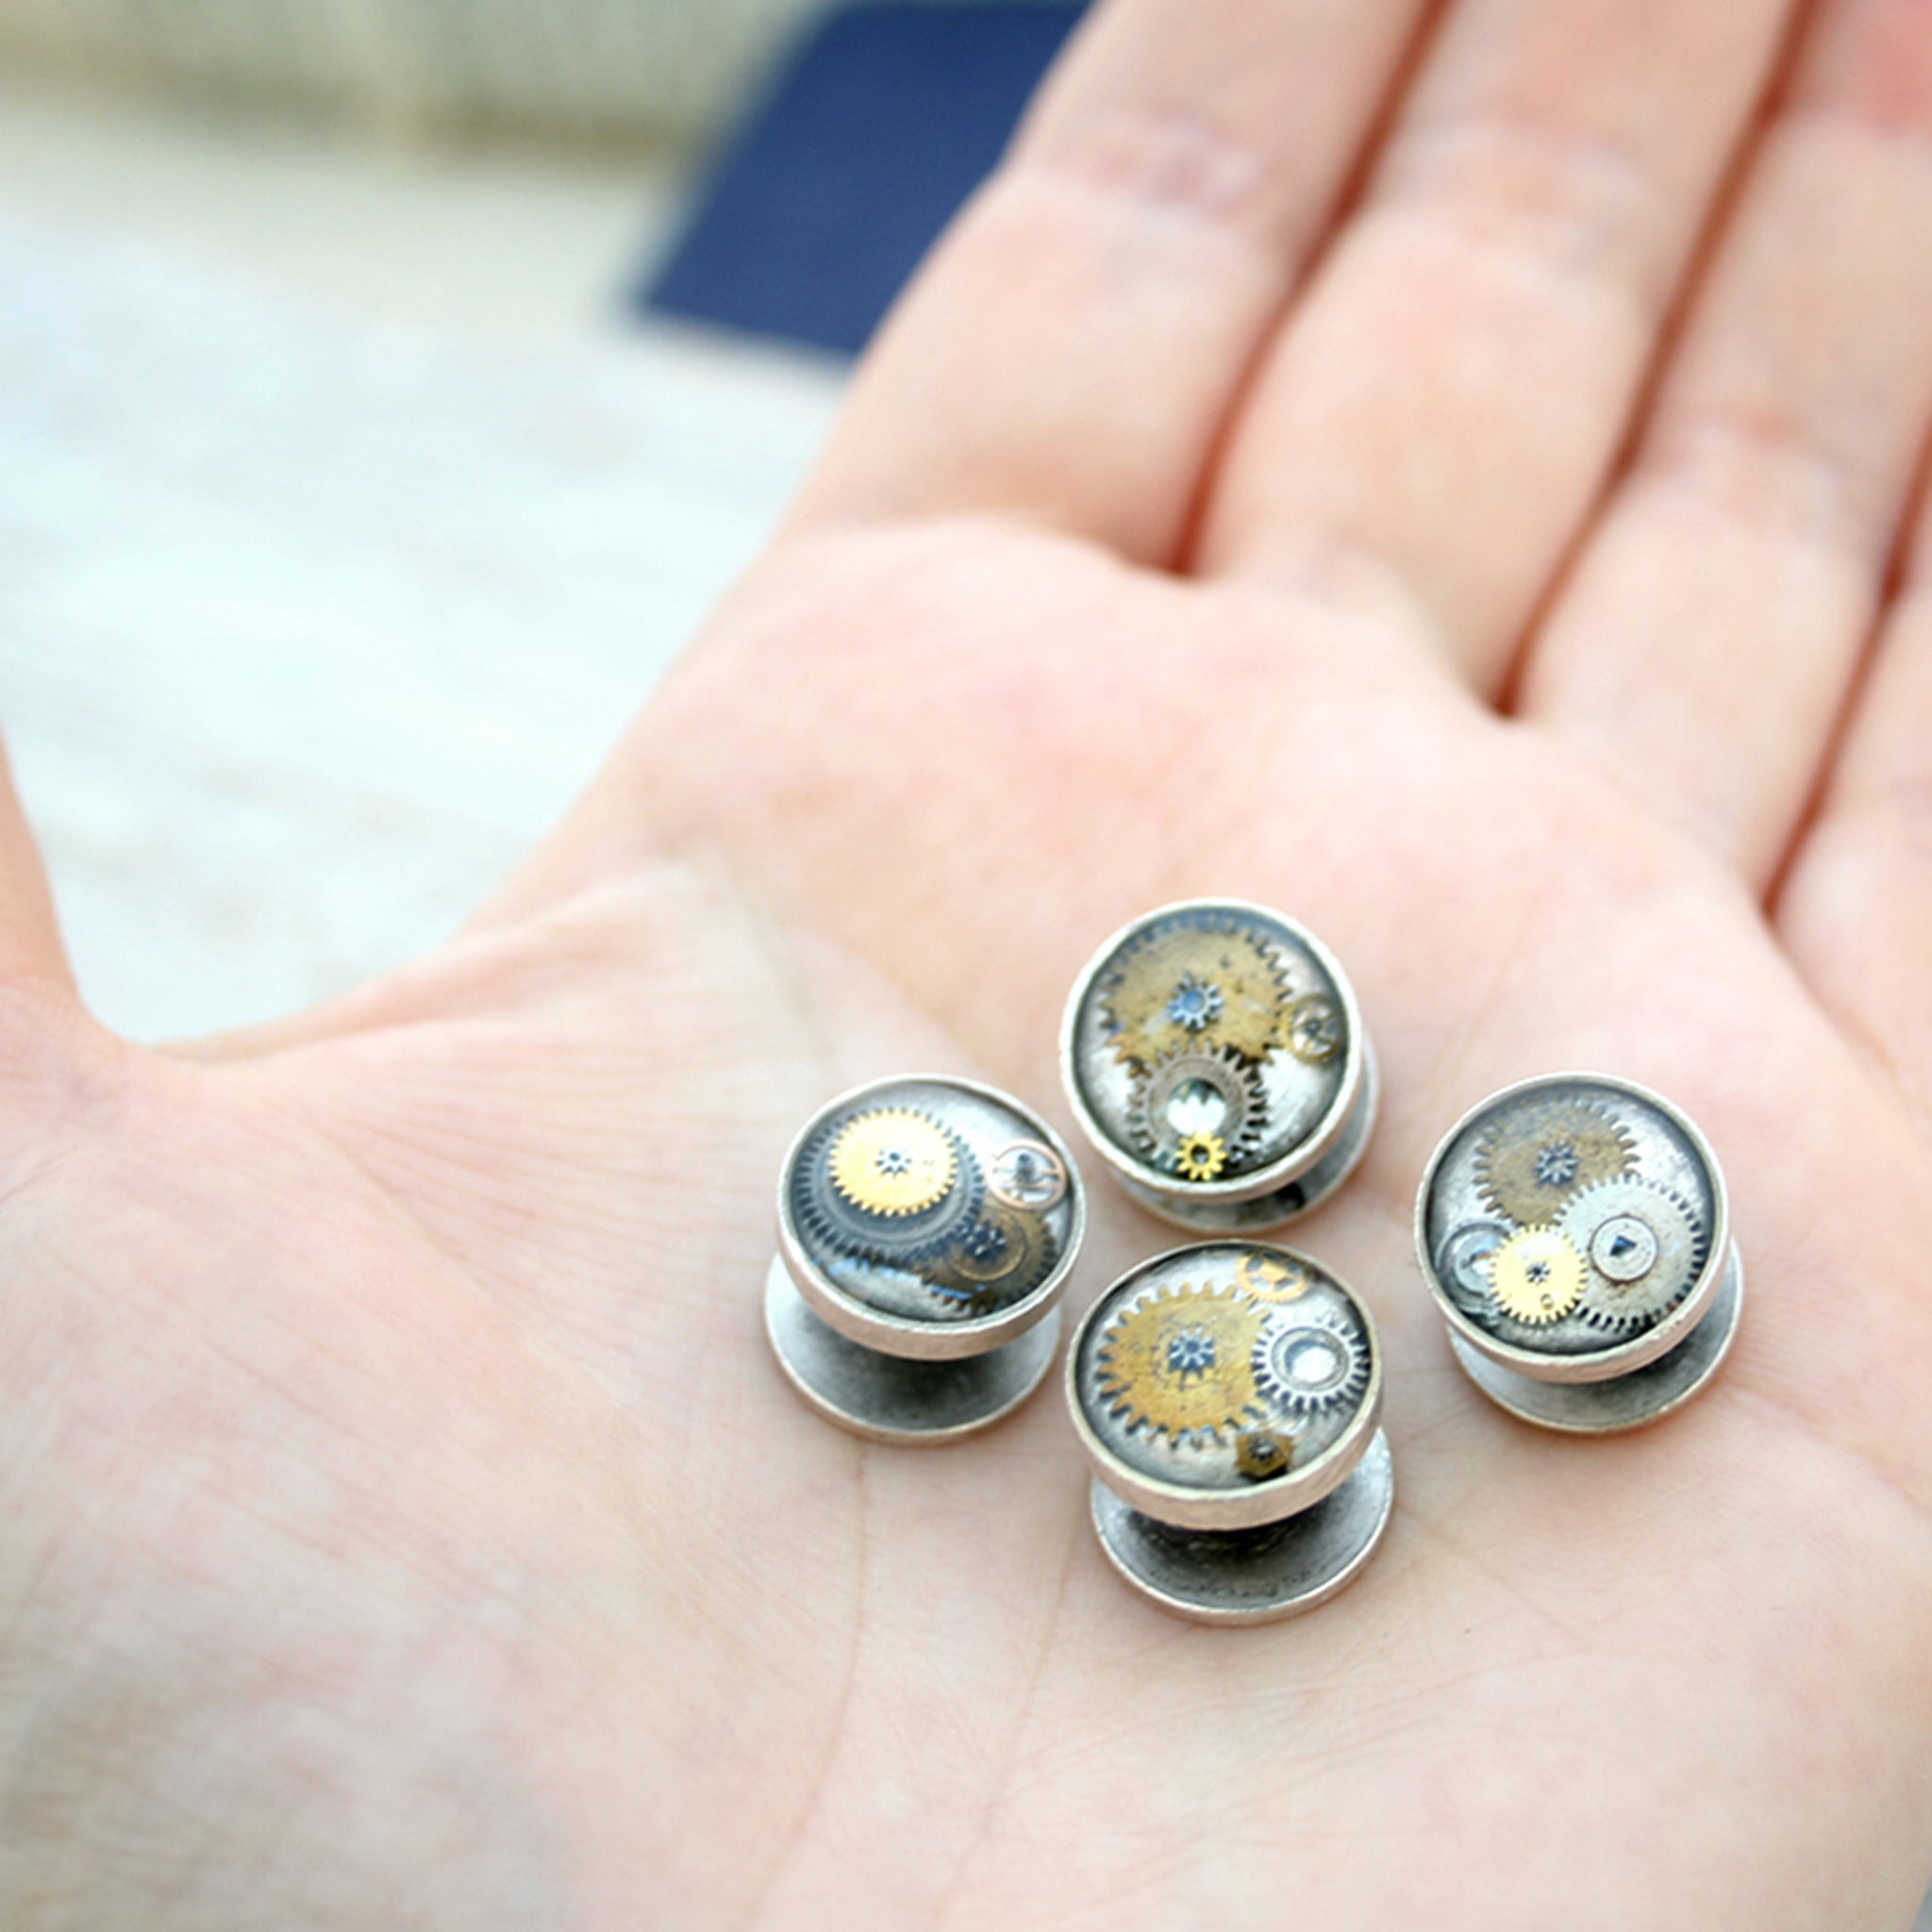 Antique Silver tone tuxedo studs featuring vintage watch parts filled with resin on hand